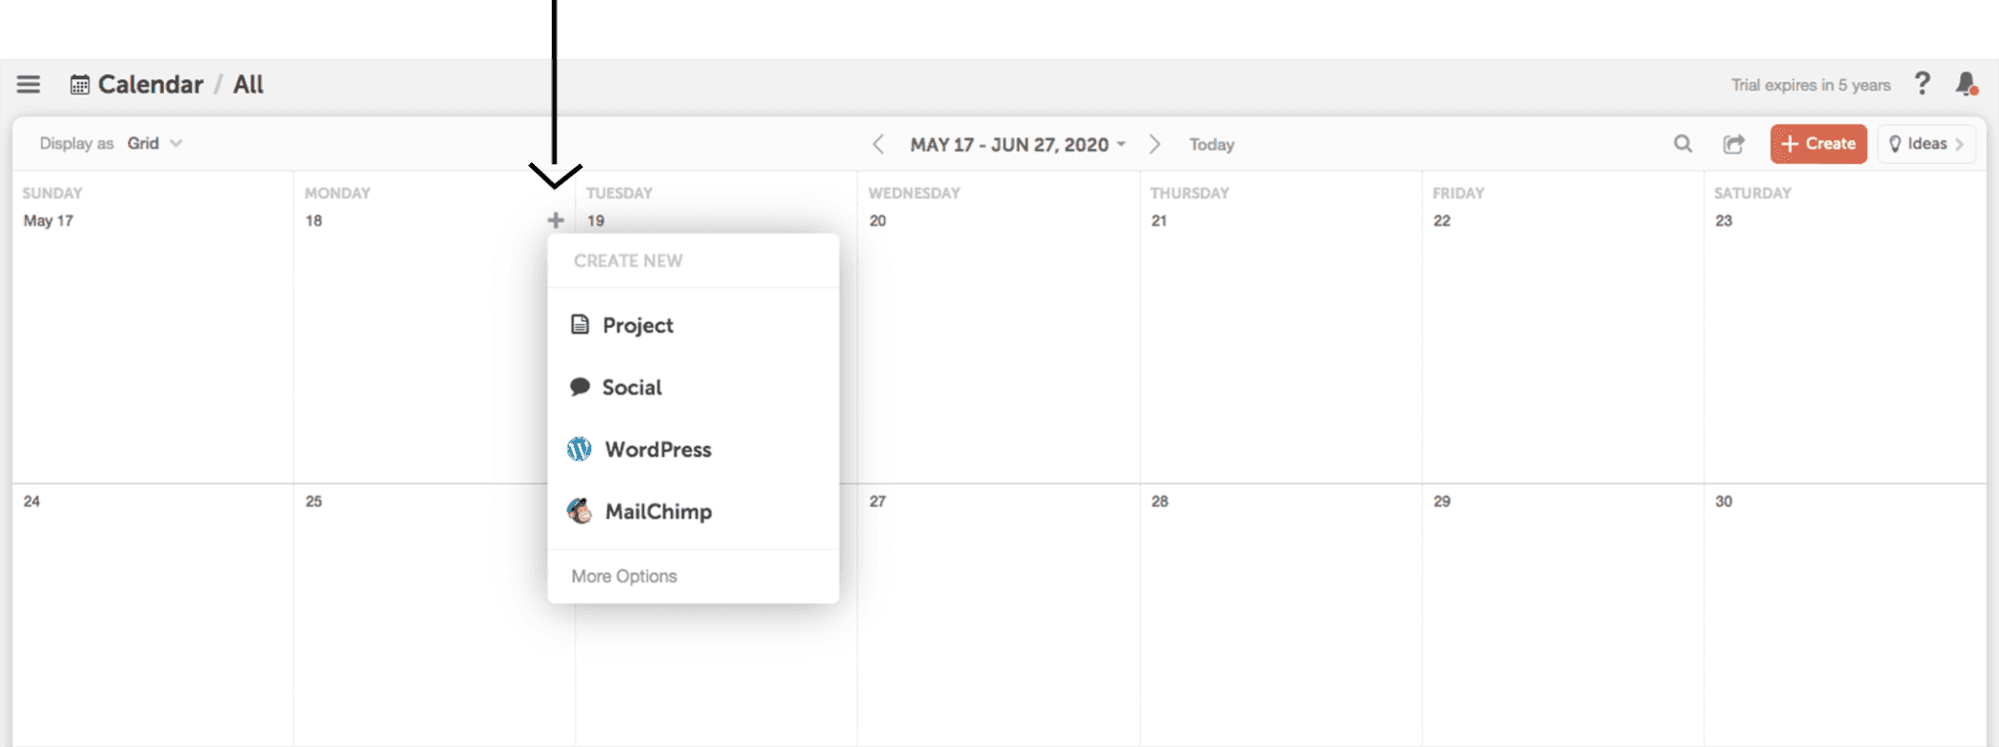 image showing new project in marketing calendar